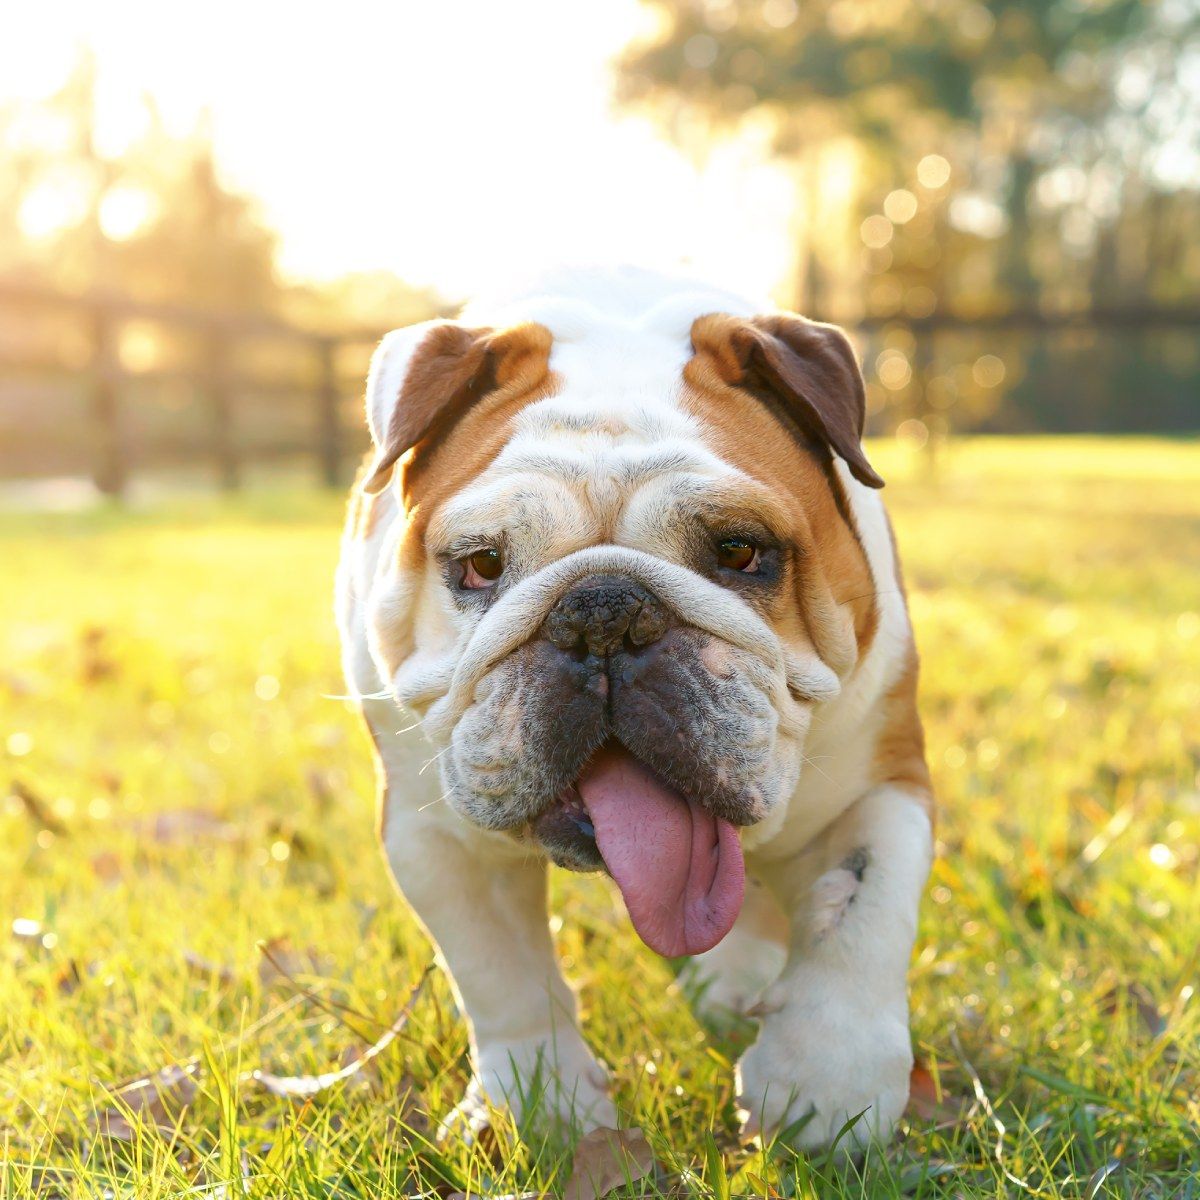 A brown and white English bulldog trots across green grass on a sunny day